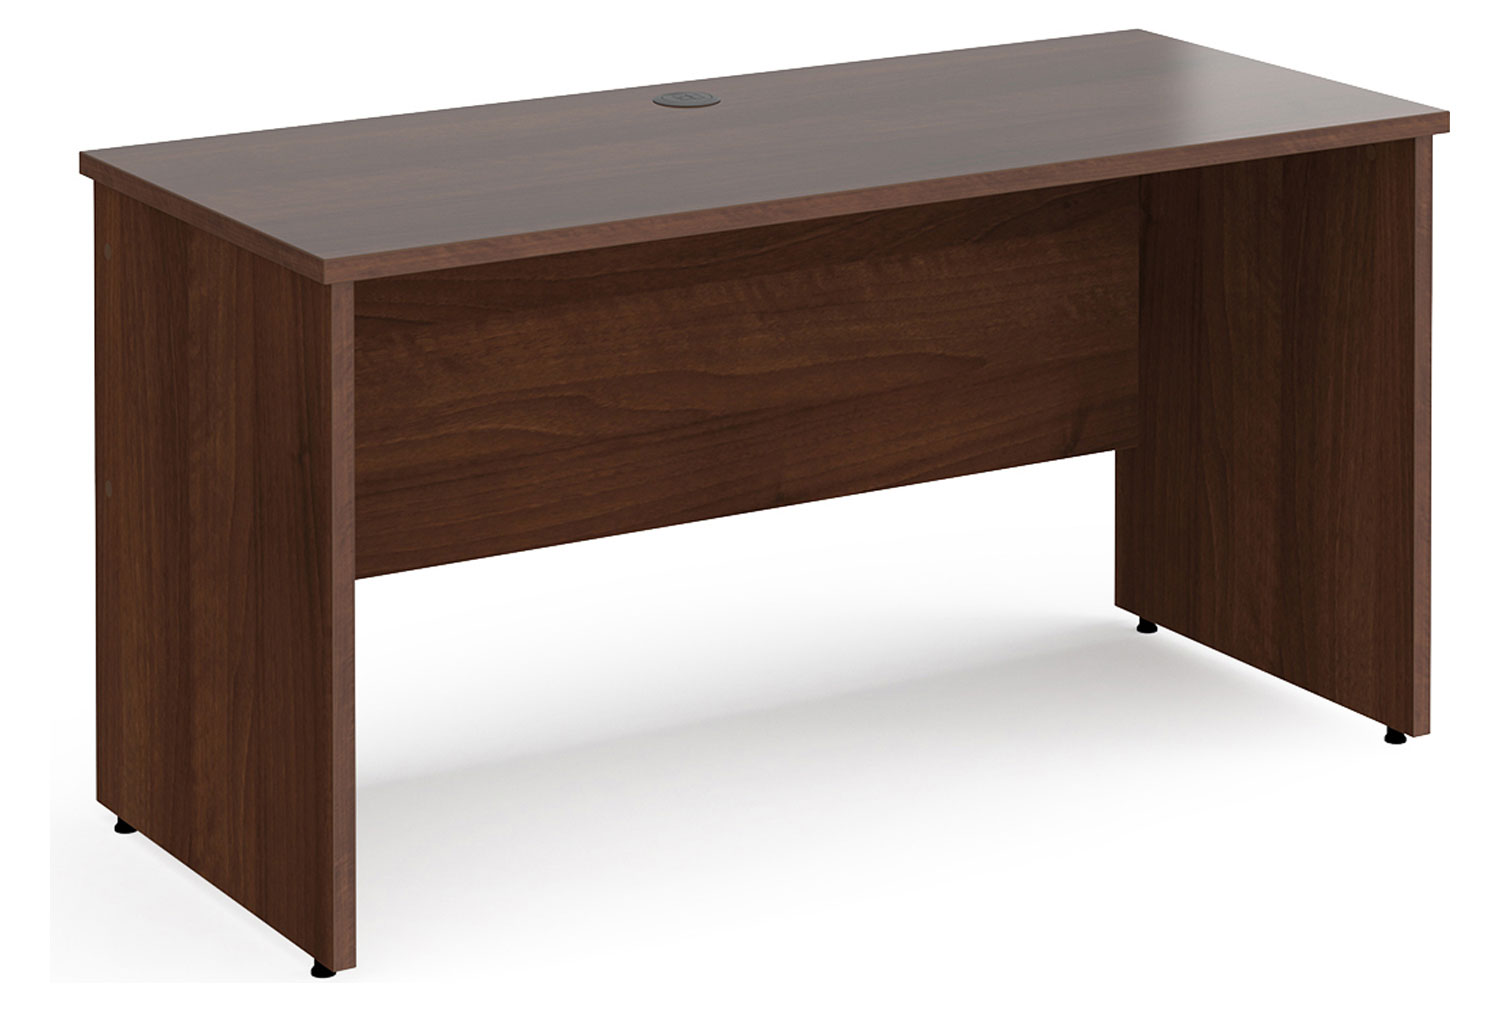 Tully Panel End Narrow Rectangular Office Desk, 140wx60dx73h (cm), Walnut, Express Delivery